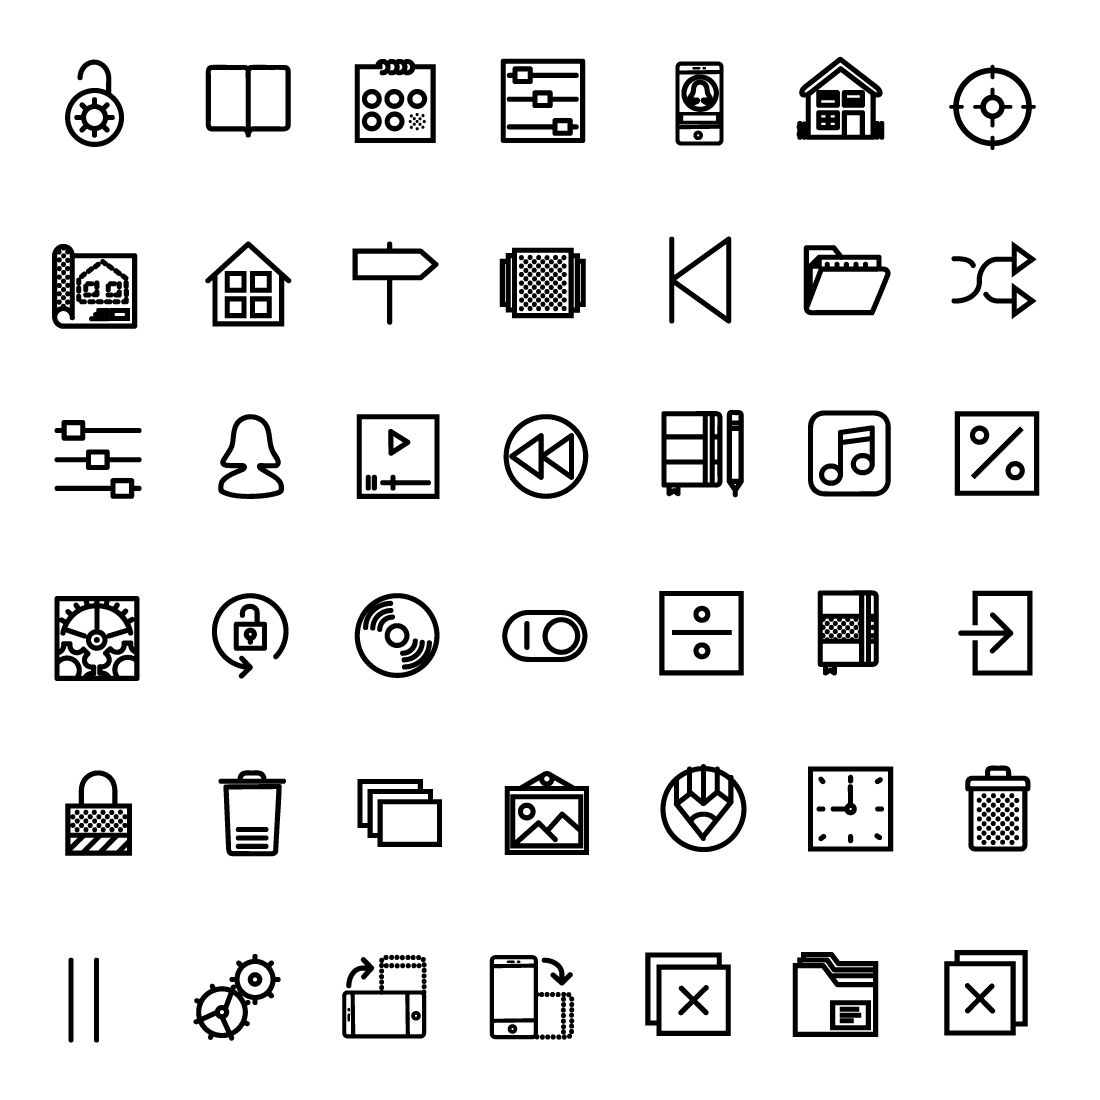 Set of different types of icons.